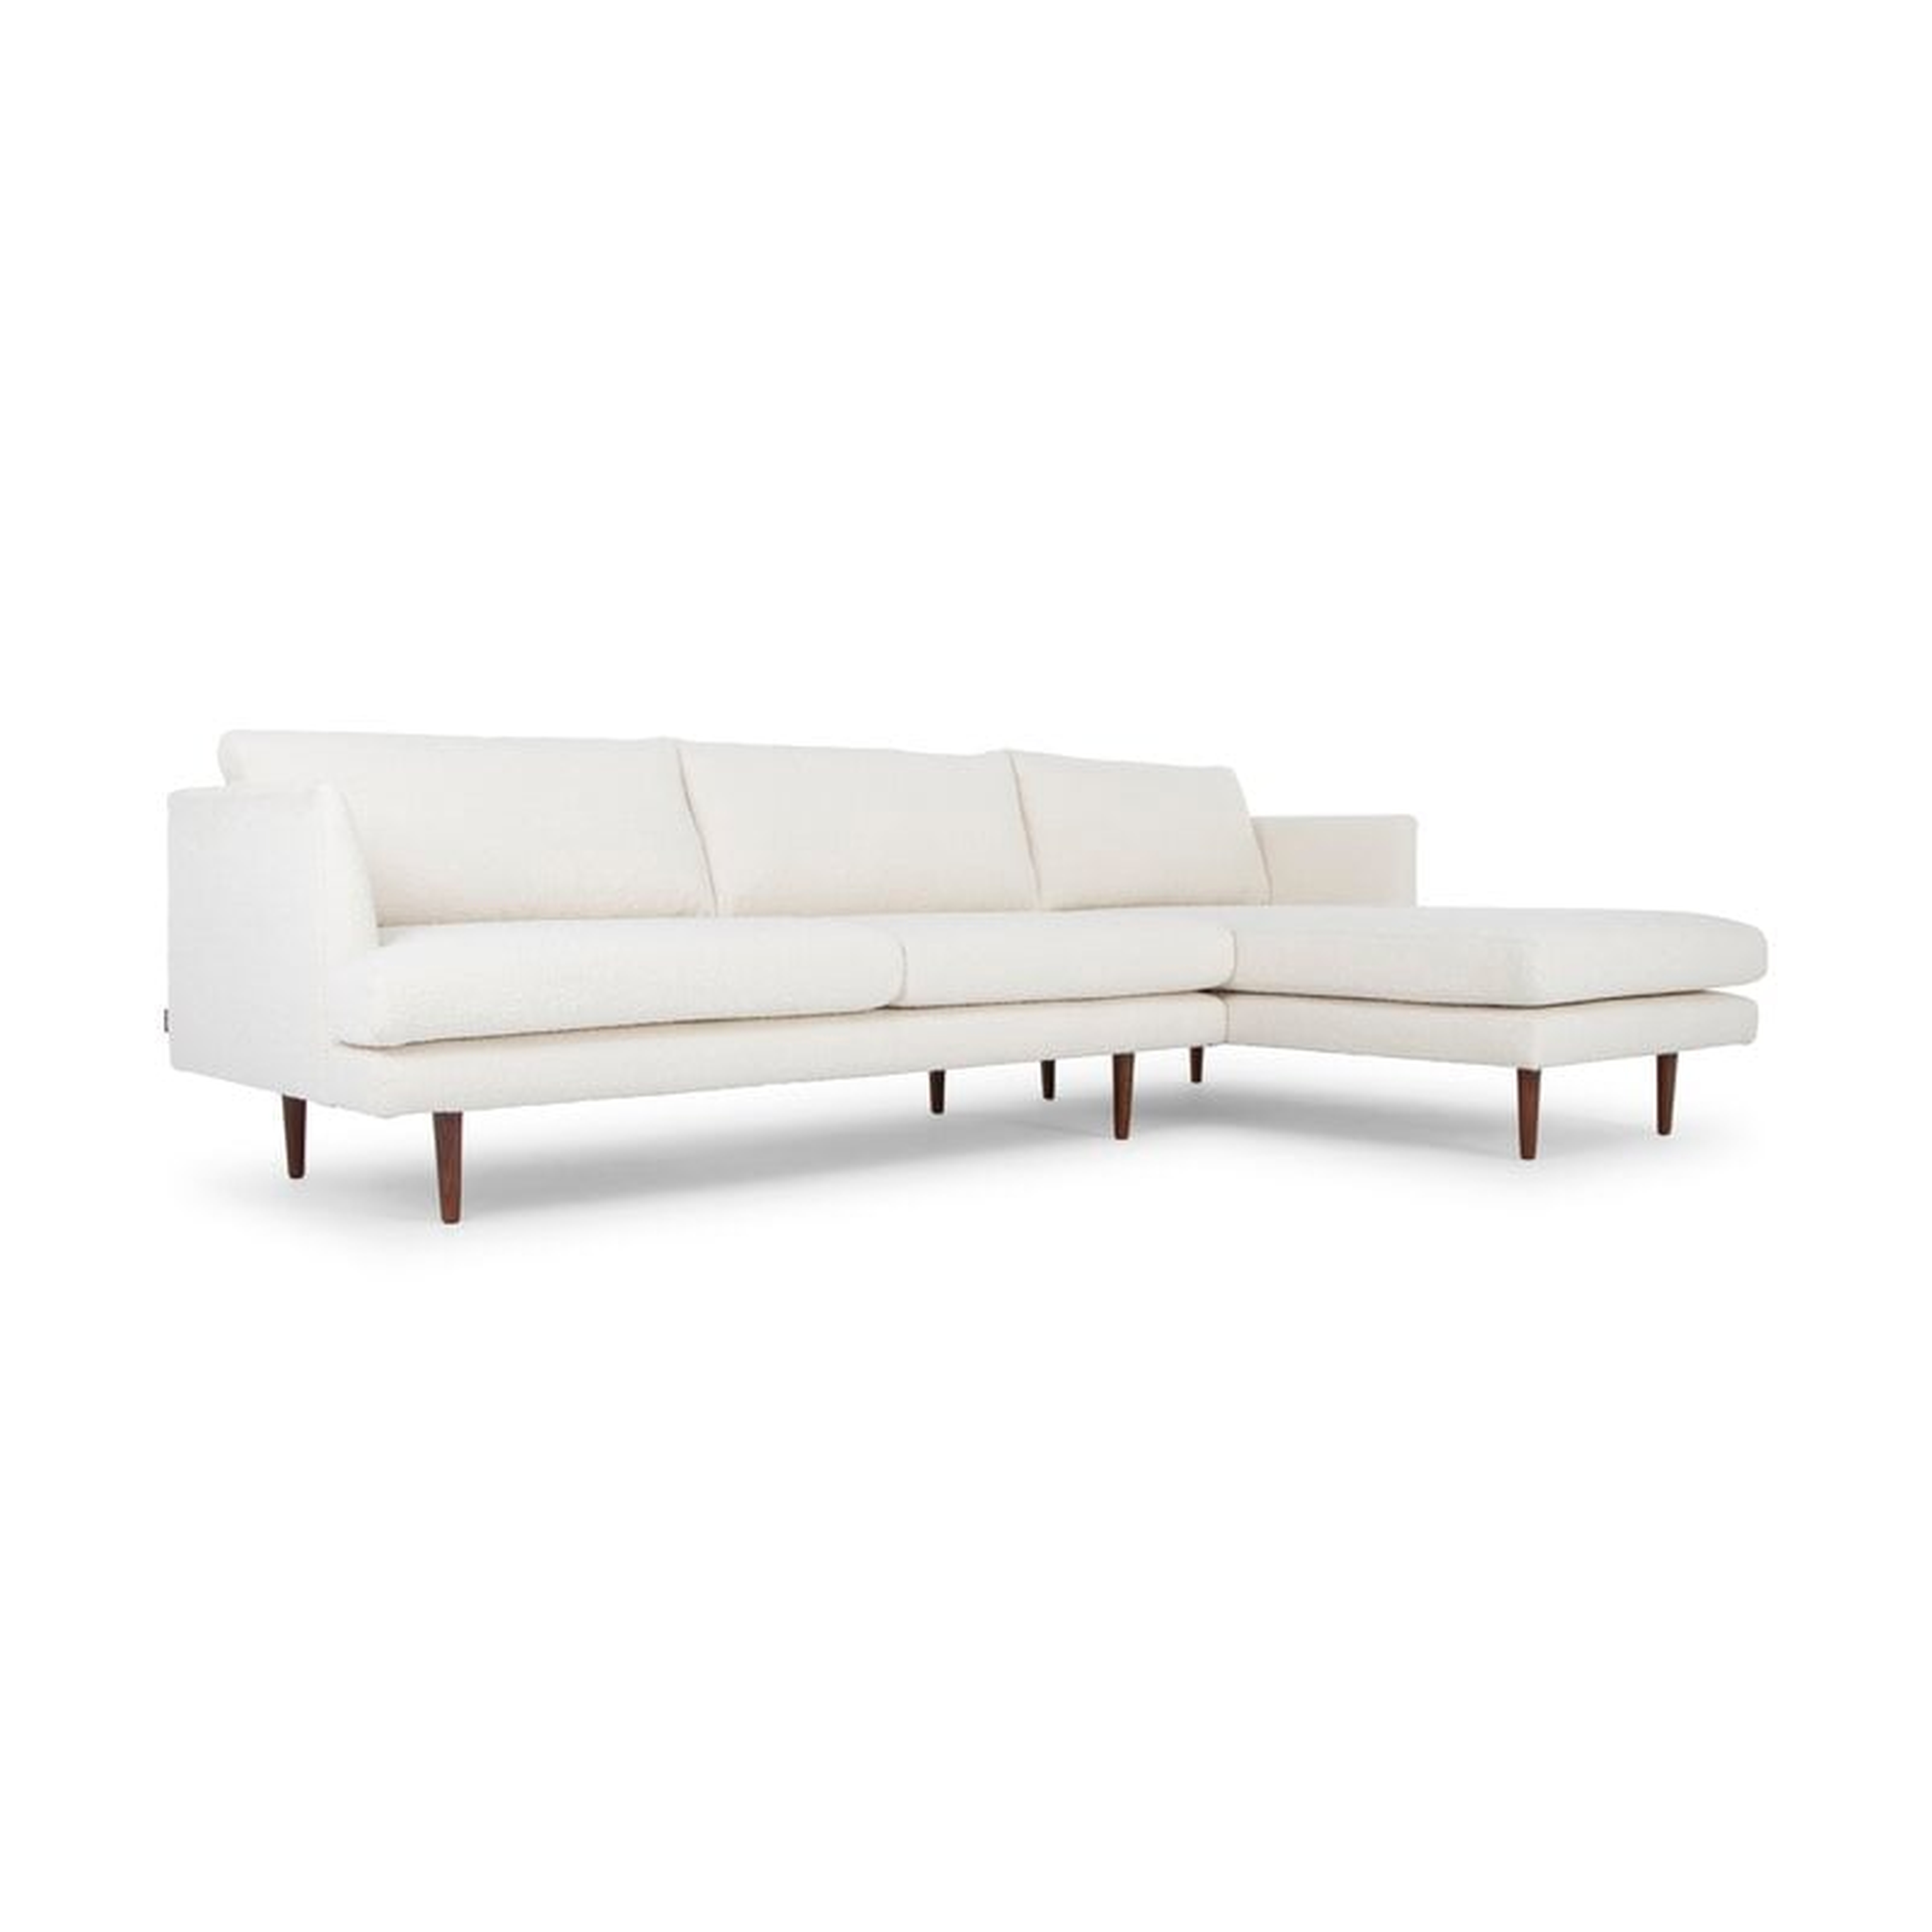 Miller 2 - Piece Upholstered Chaise Sectional - AllModern